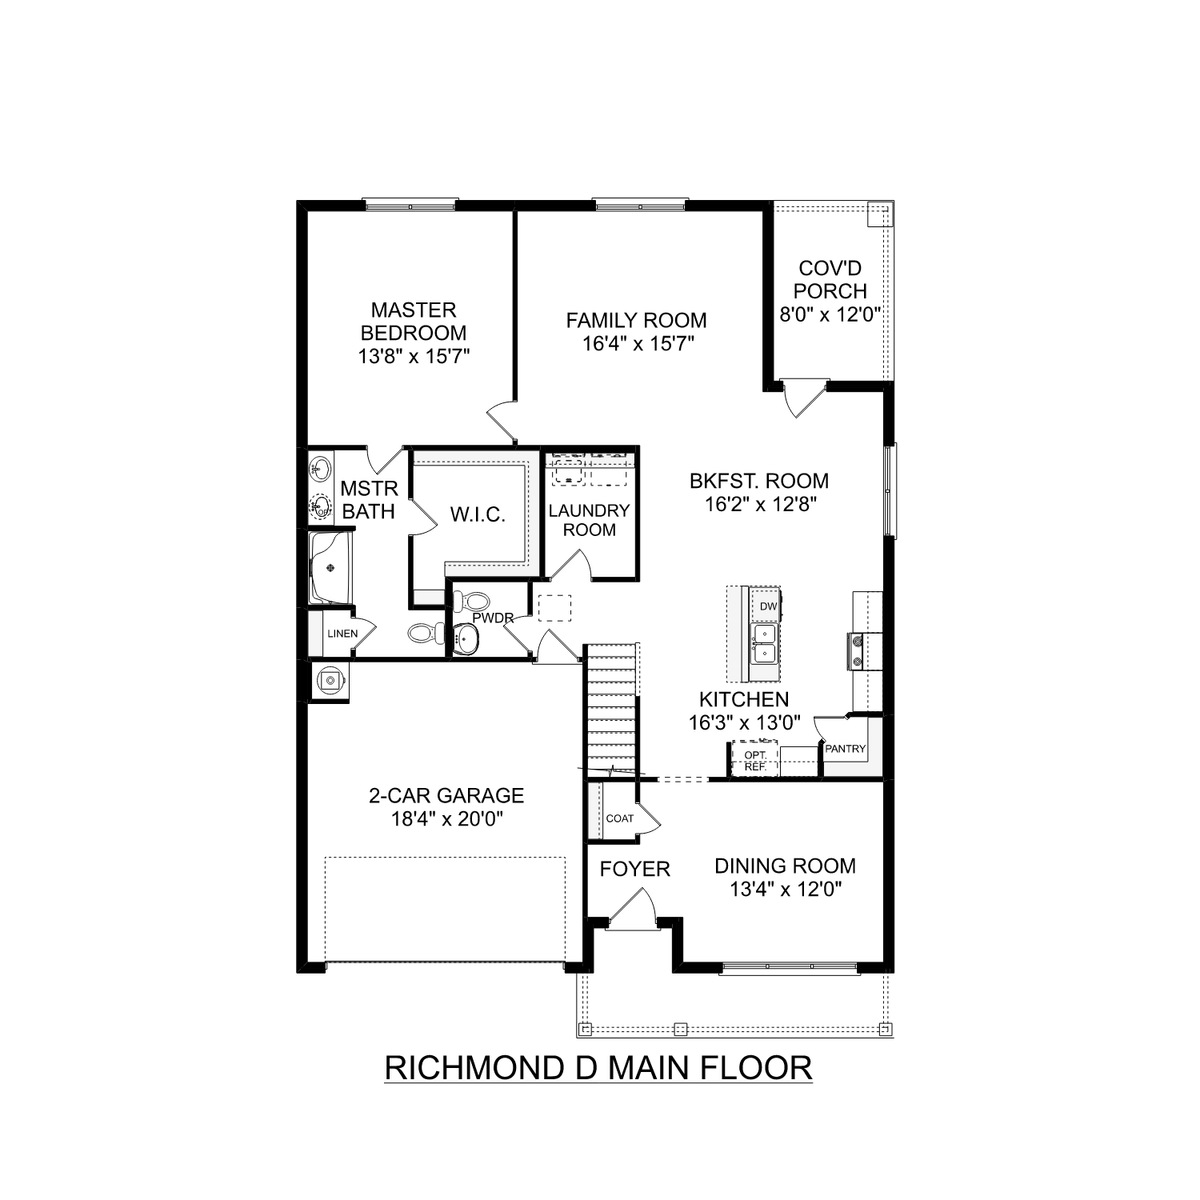 1 - The Richmond D buildable floor plan layout in Davidson Homes' Heritage Lakes community.